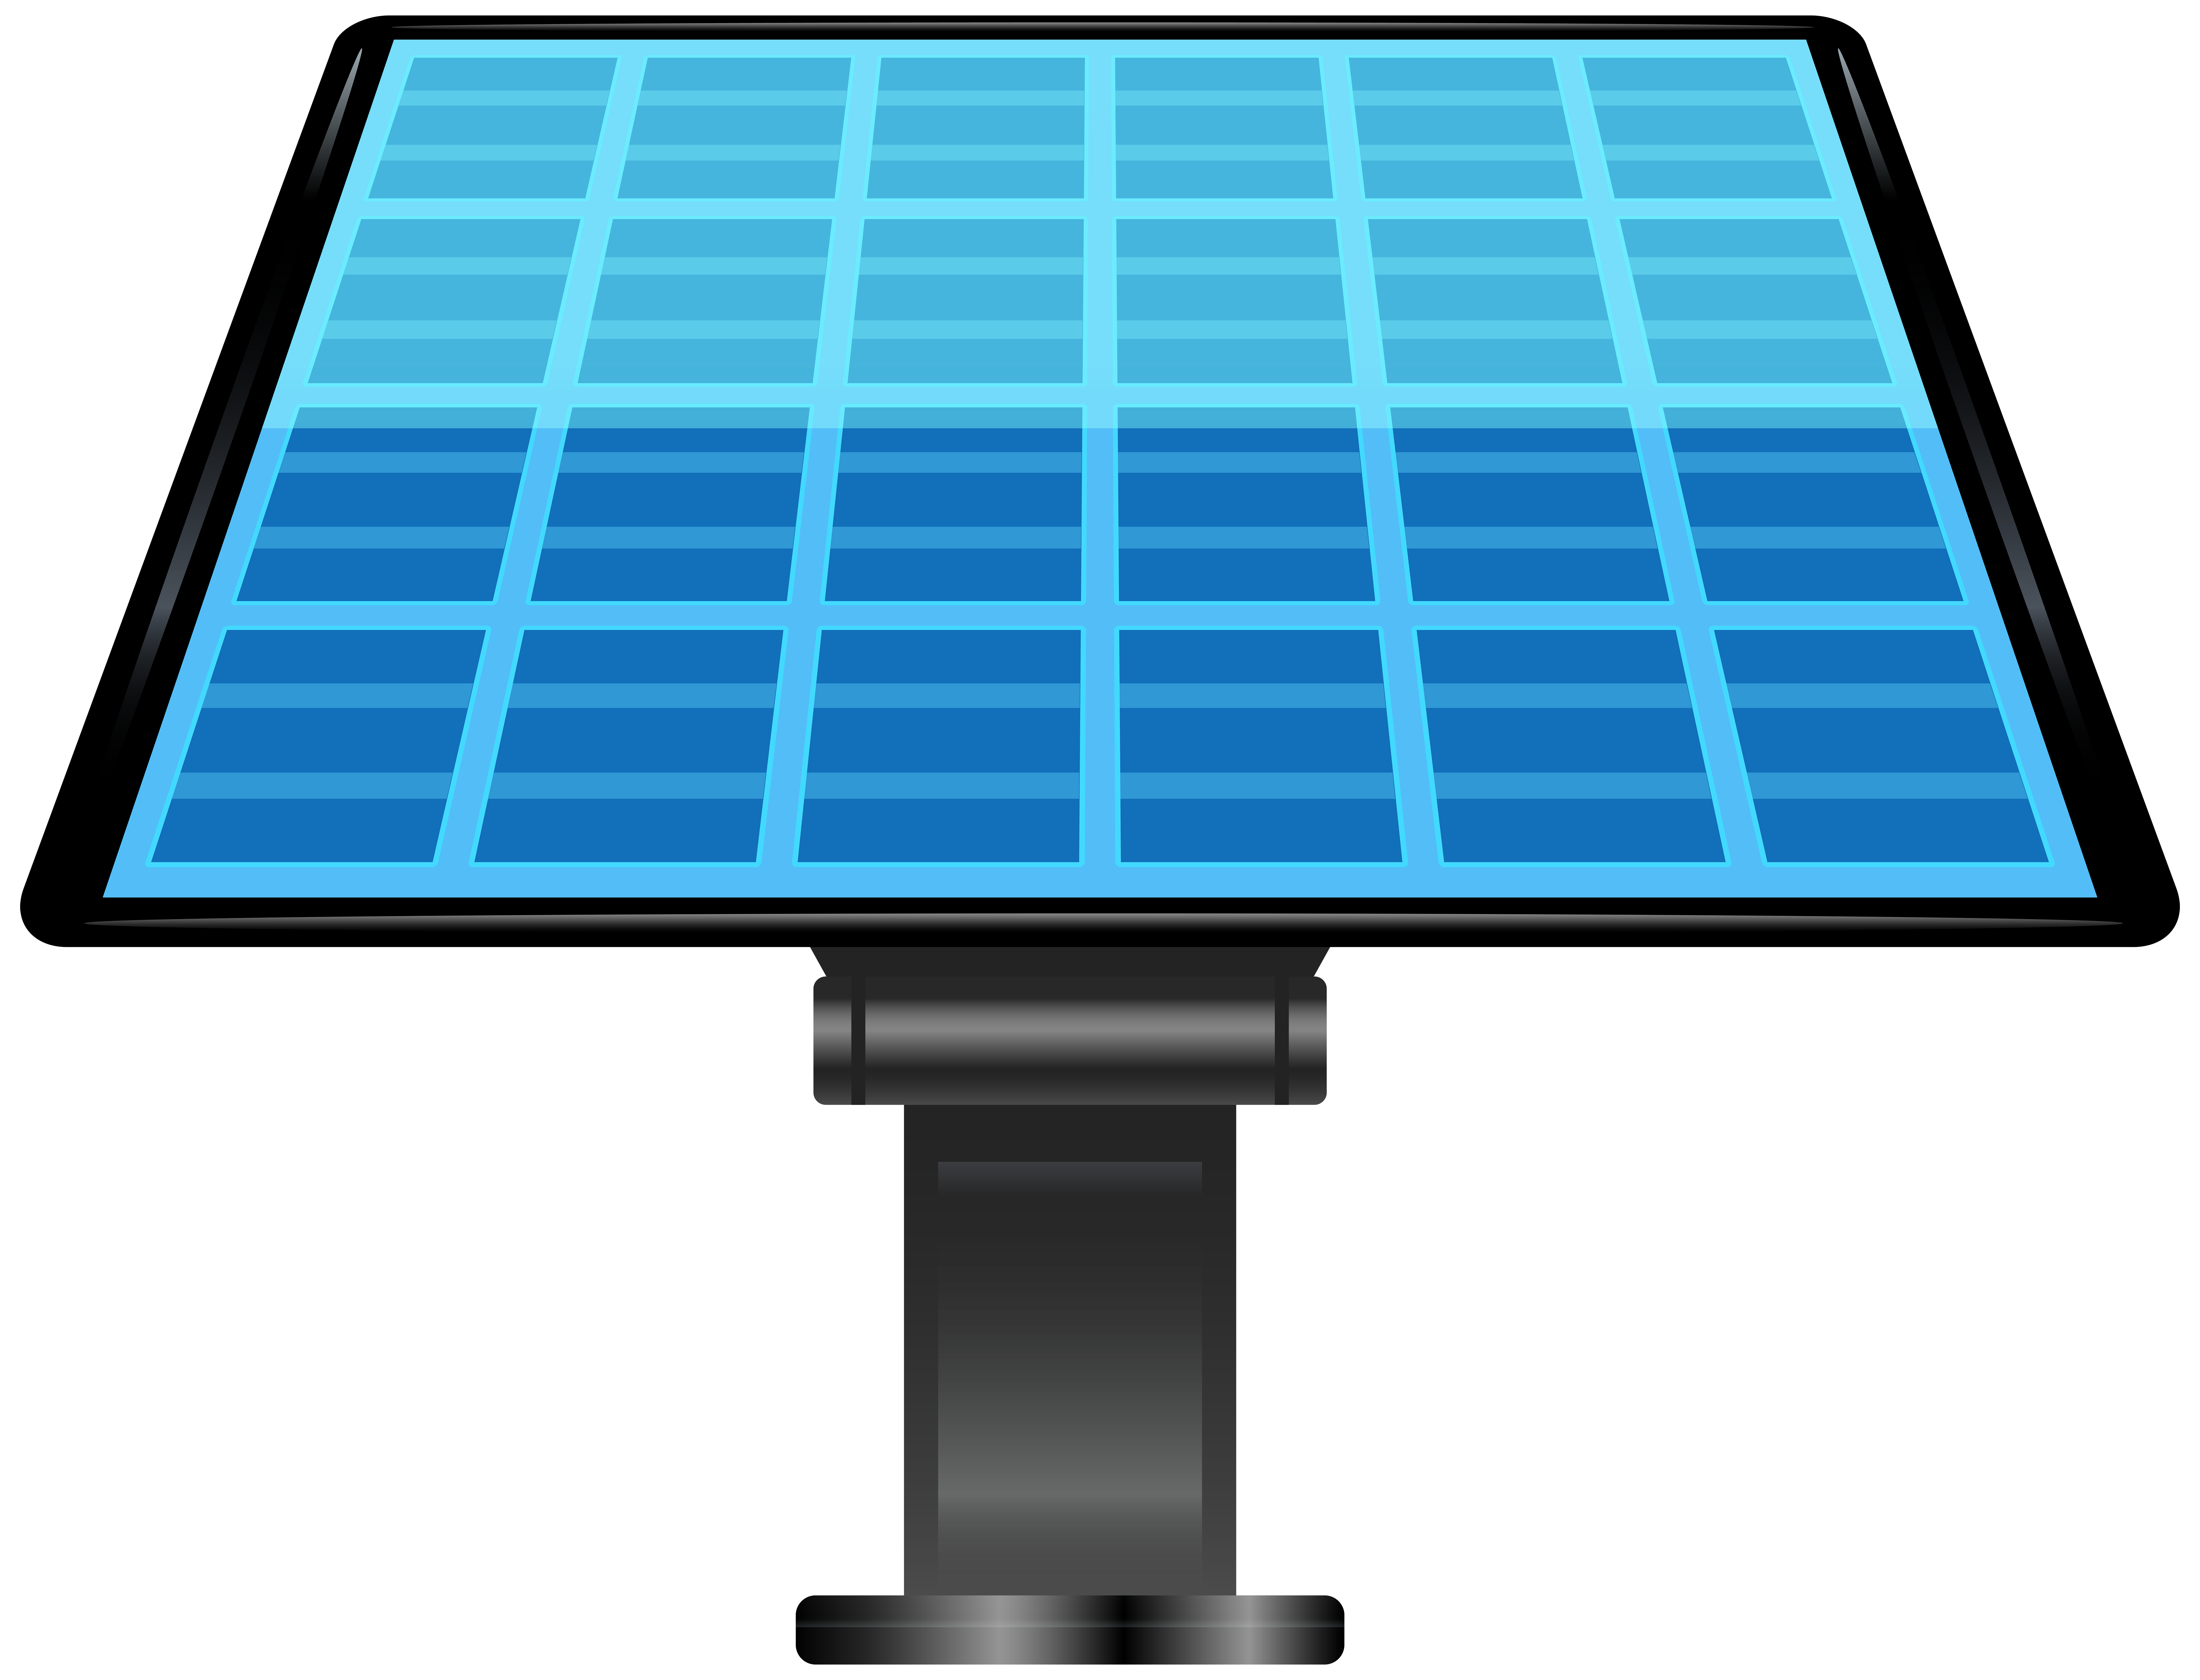 Free Solar Panel Cliparts, Download Free Solar Panel Cliparts png